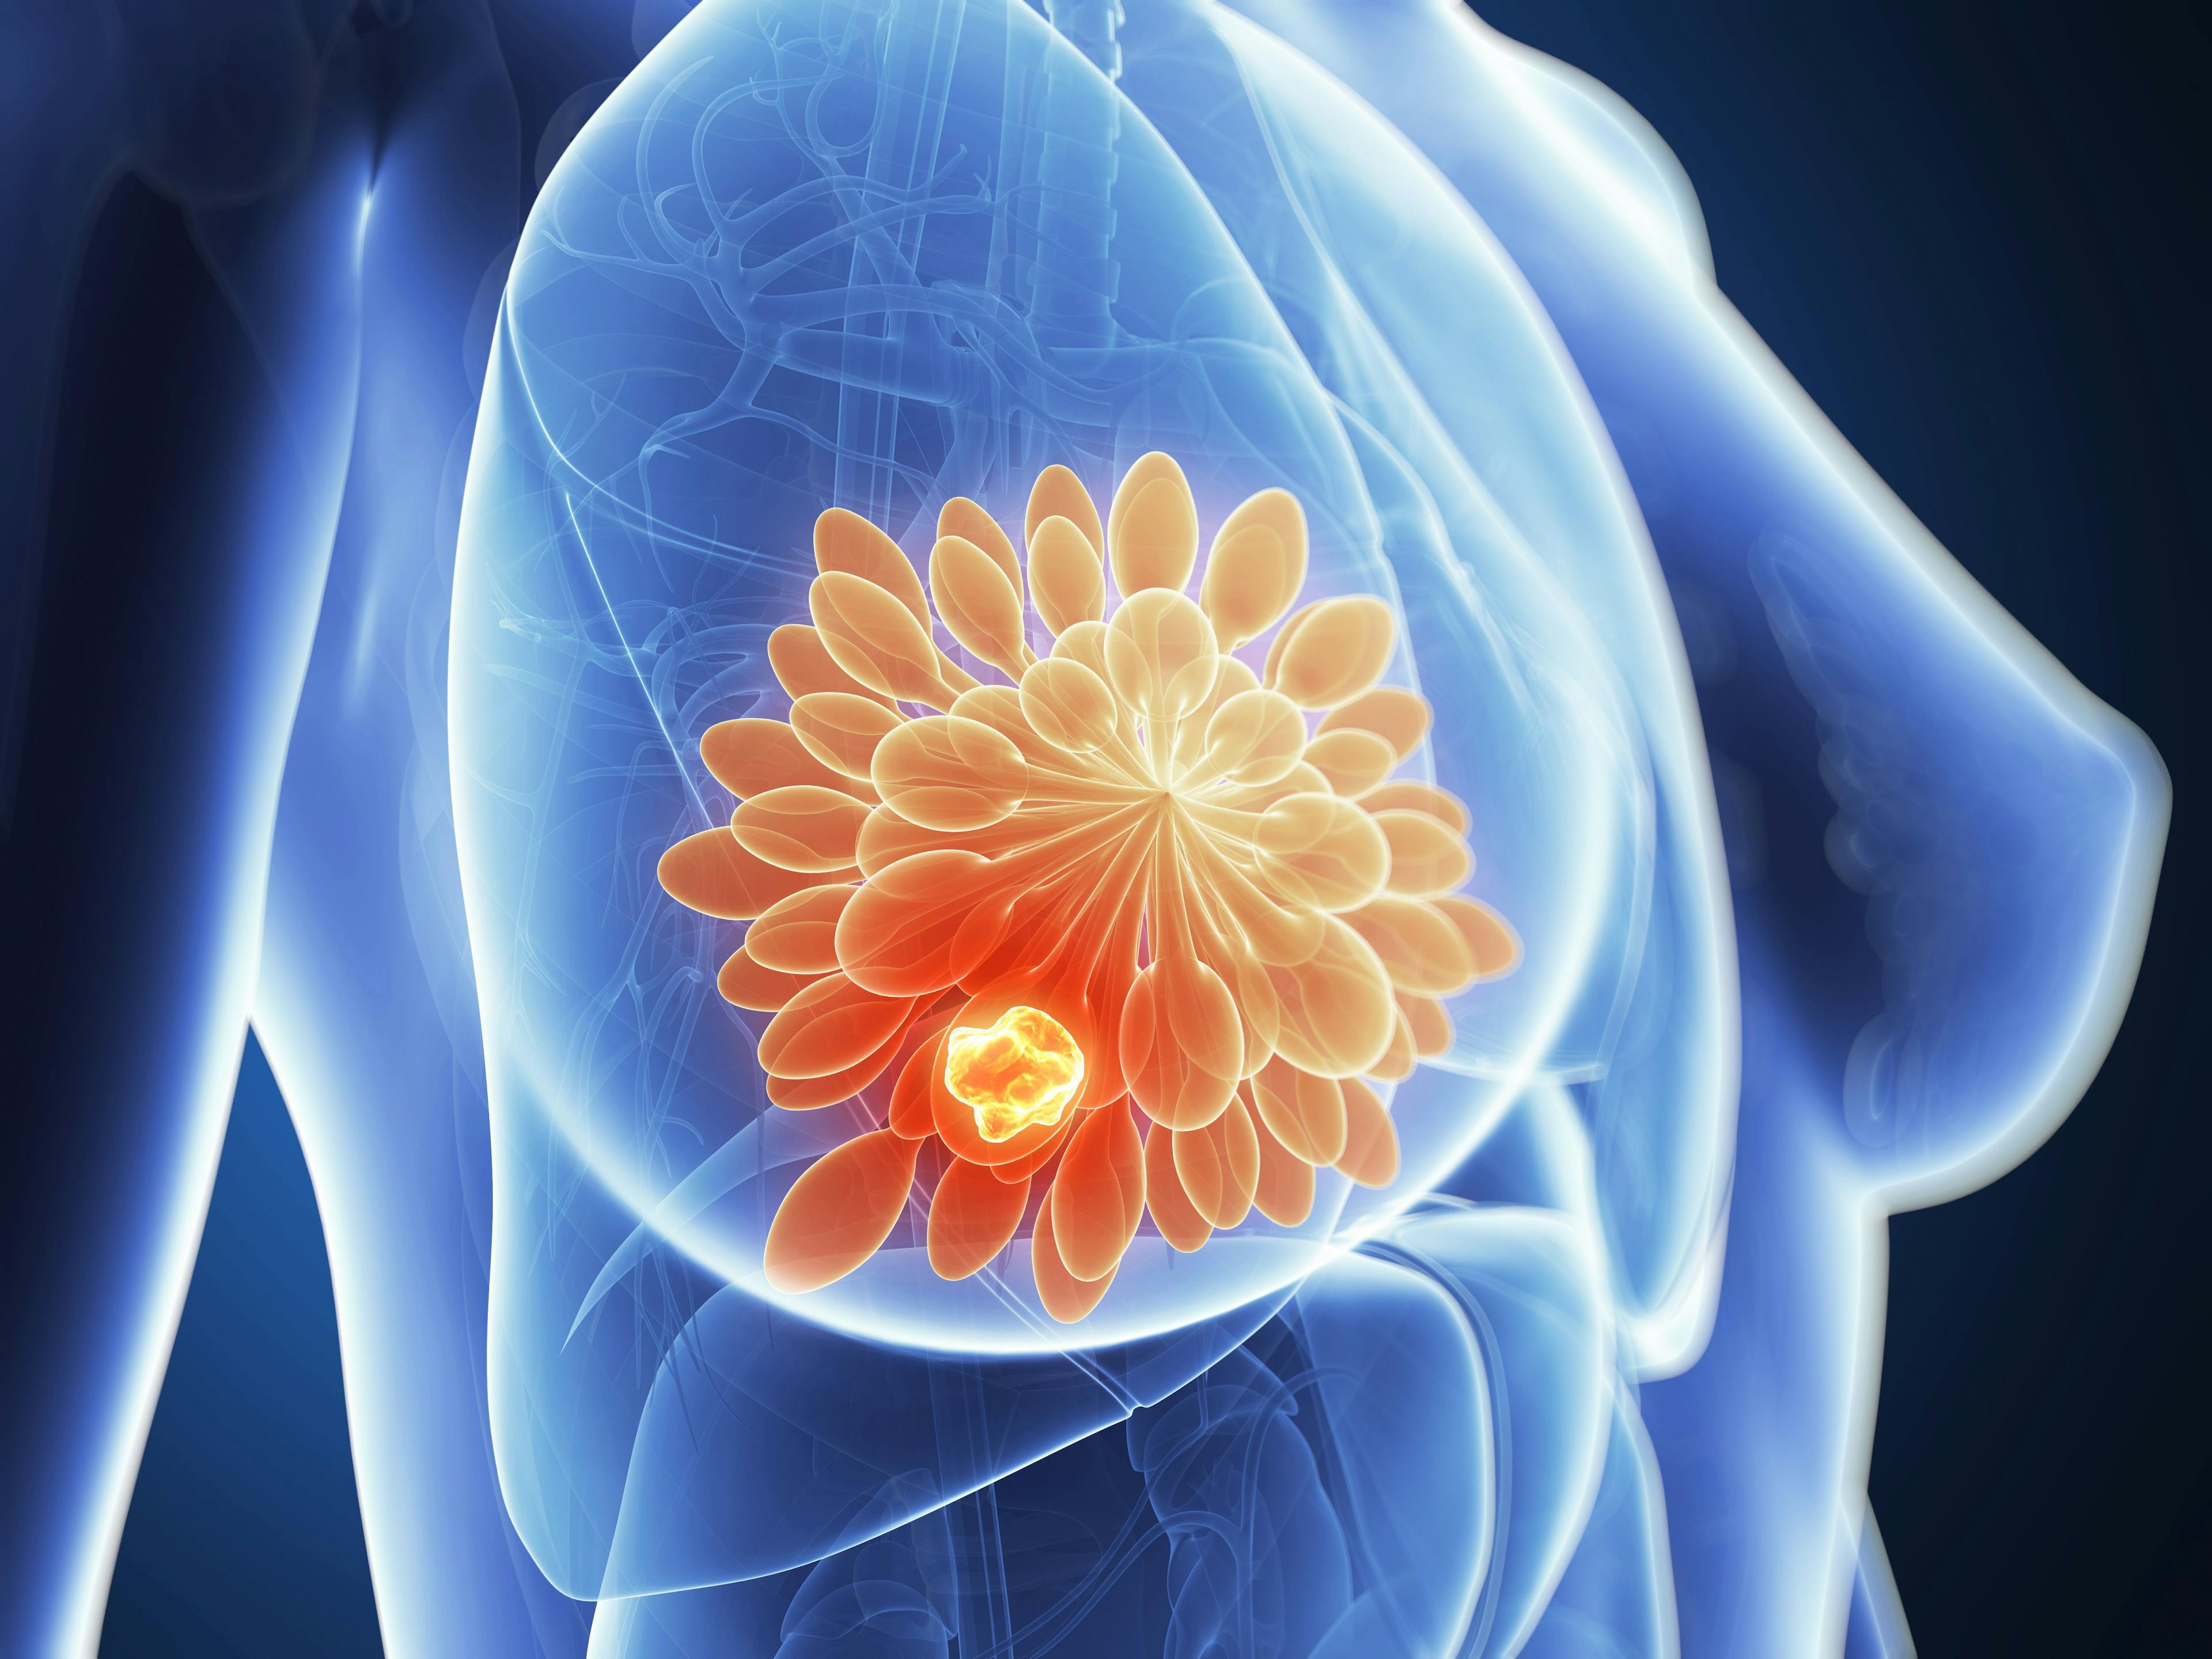 New Clinical Trial Will Assess Novel ADC in Drug Resistant HER2+ Breast Cancer